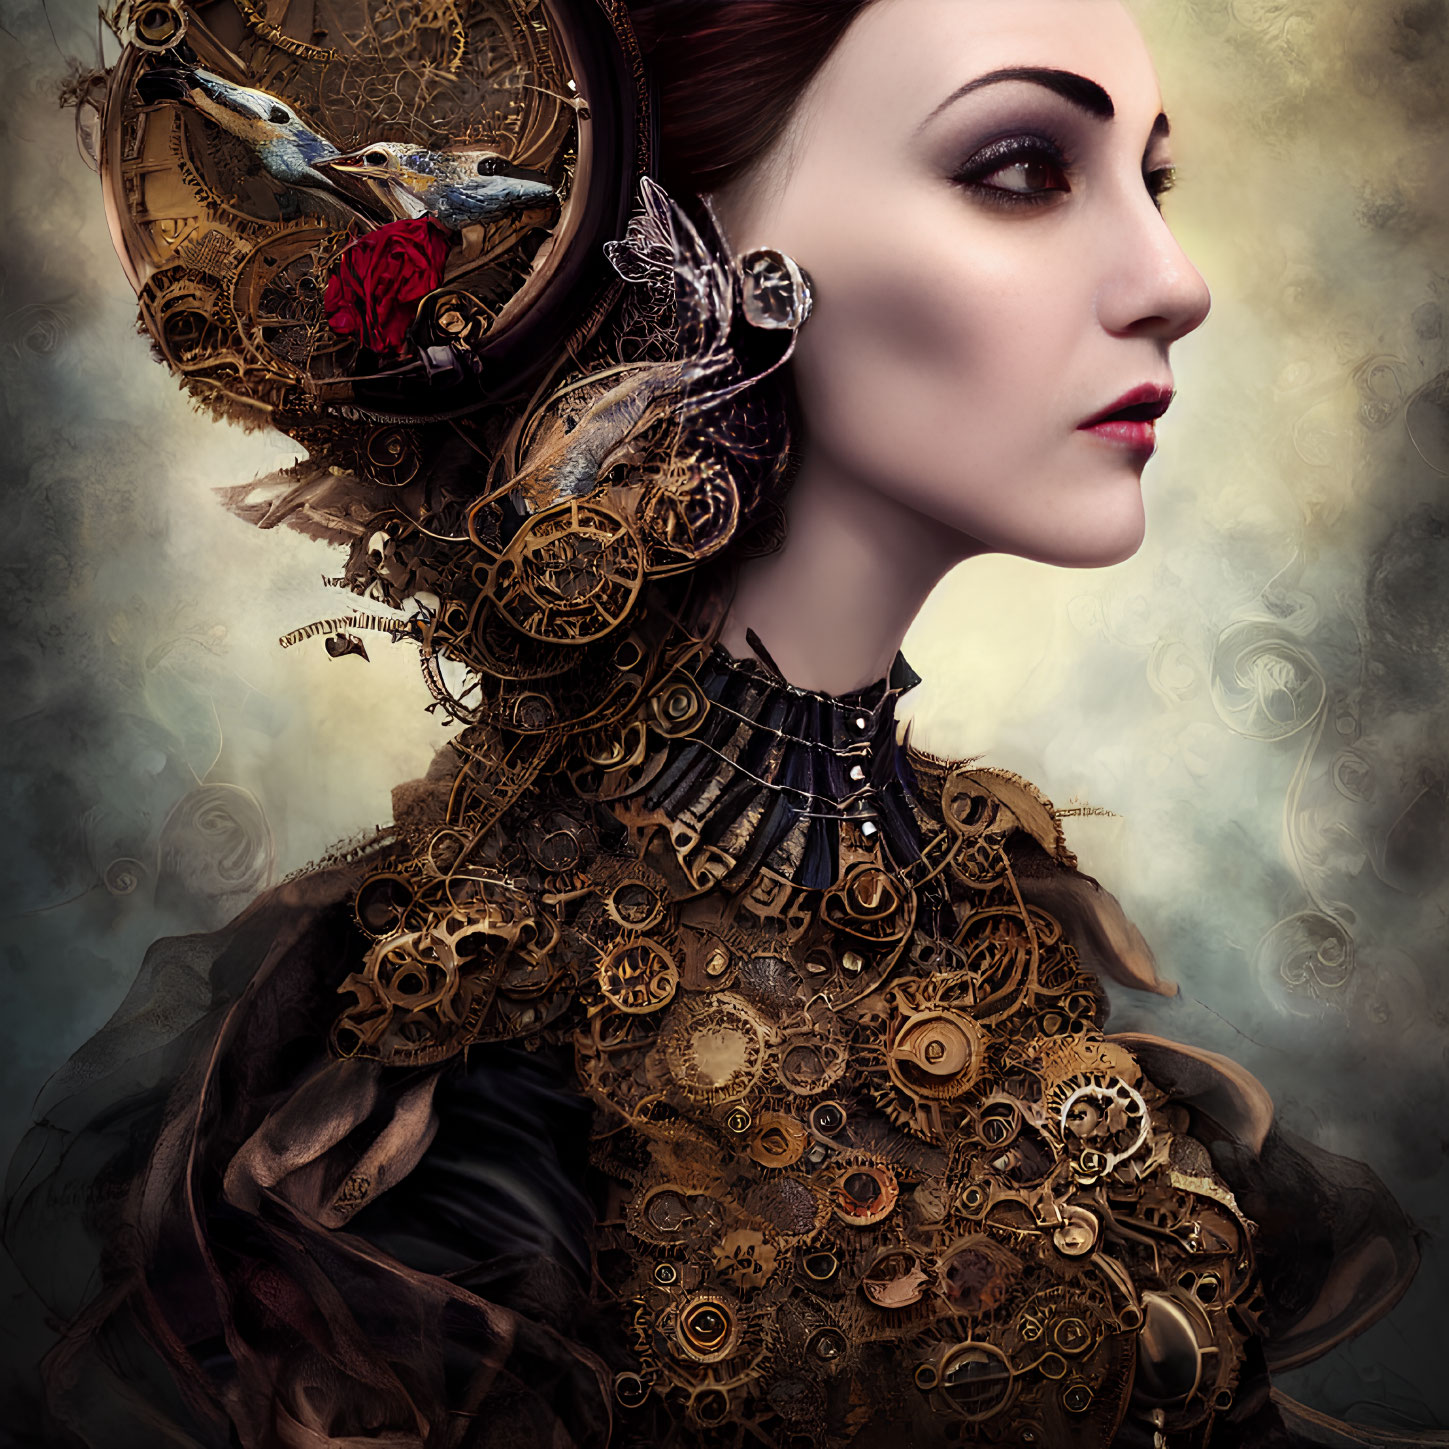 Surreal portrait of a woman with mechanical cogwork details